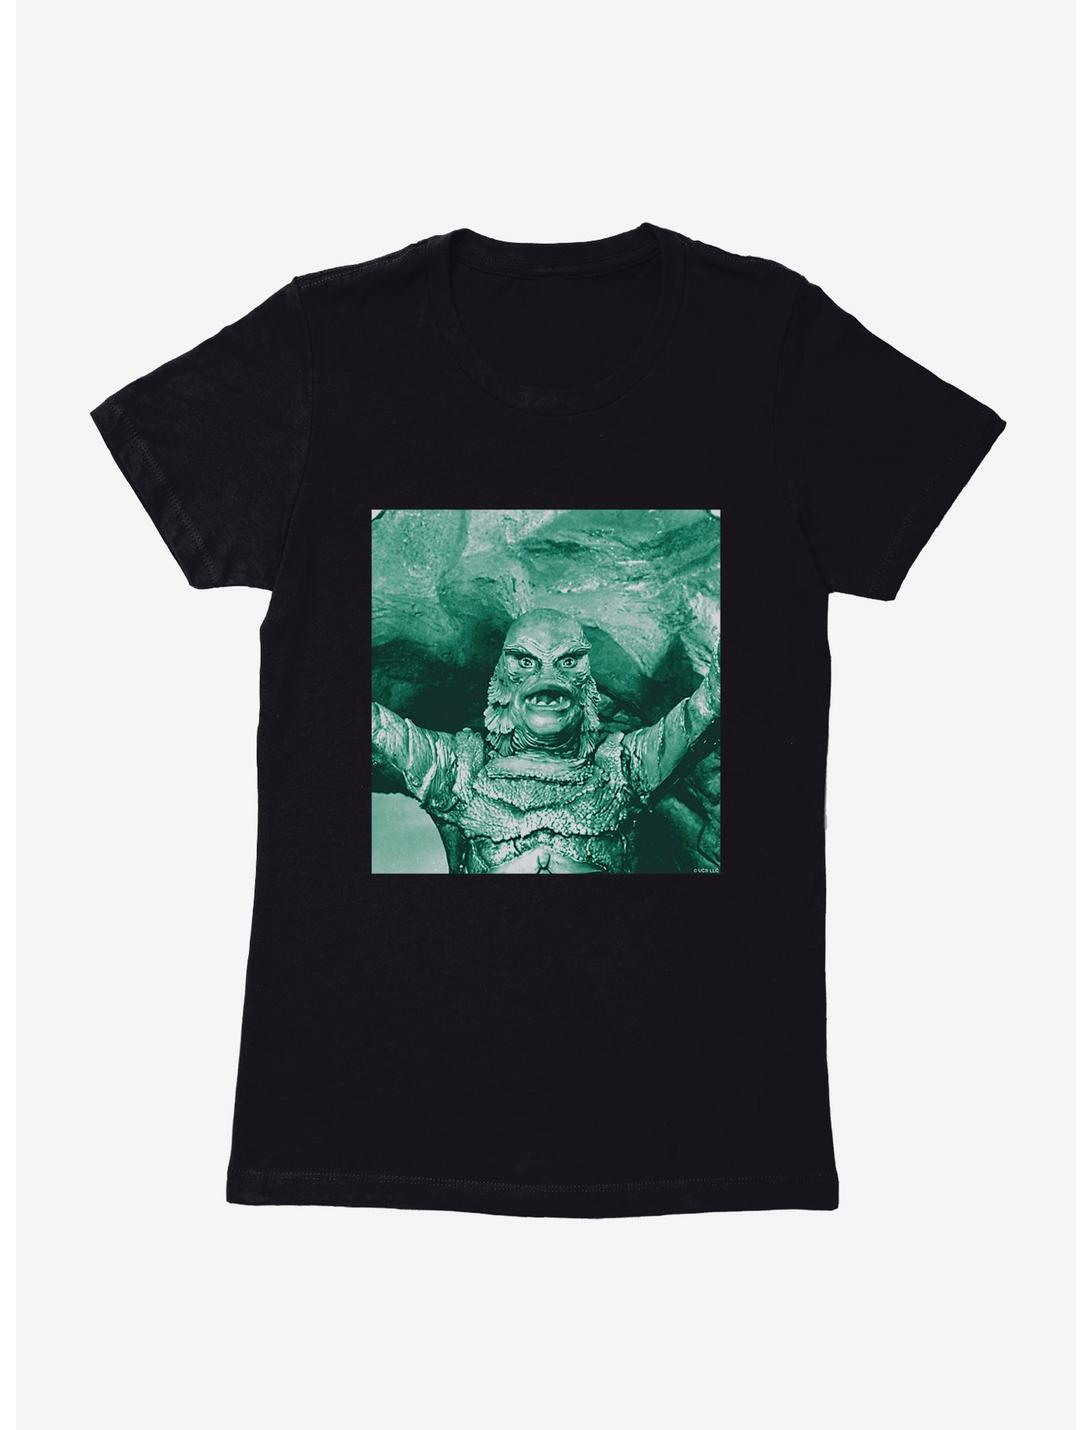 Creature From The Black Lagoon Live Action Green Scene Womens T-Shirt, BLACK, hi-res